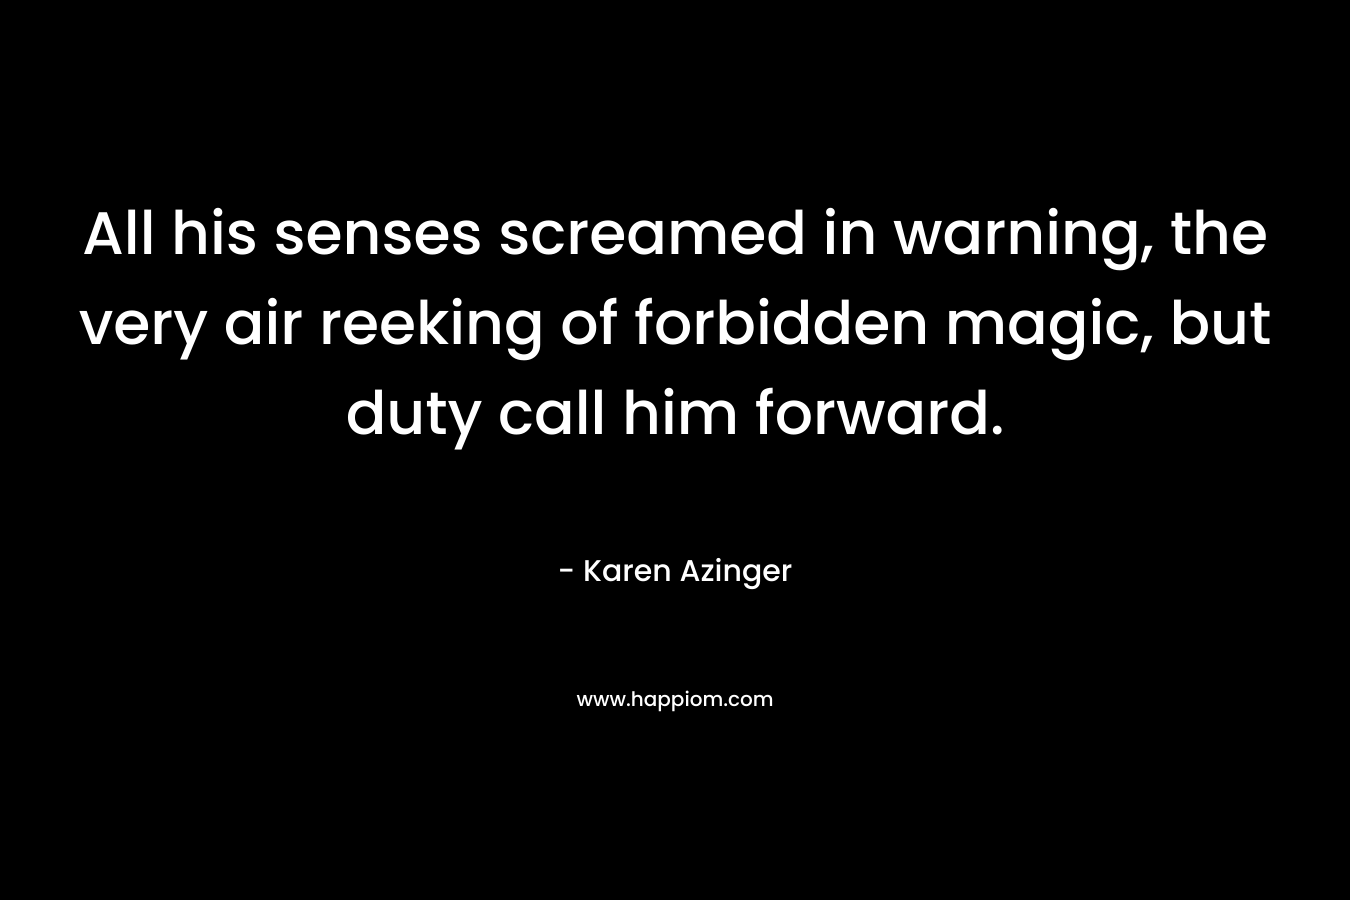 All his senses screamed in warning, the very air reeking of forbidden magic, but duty call him forward.